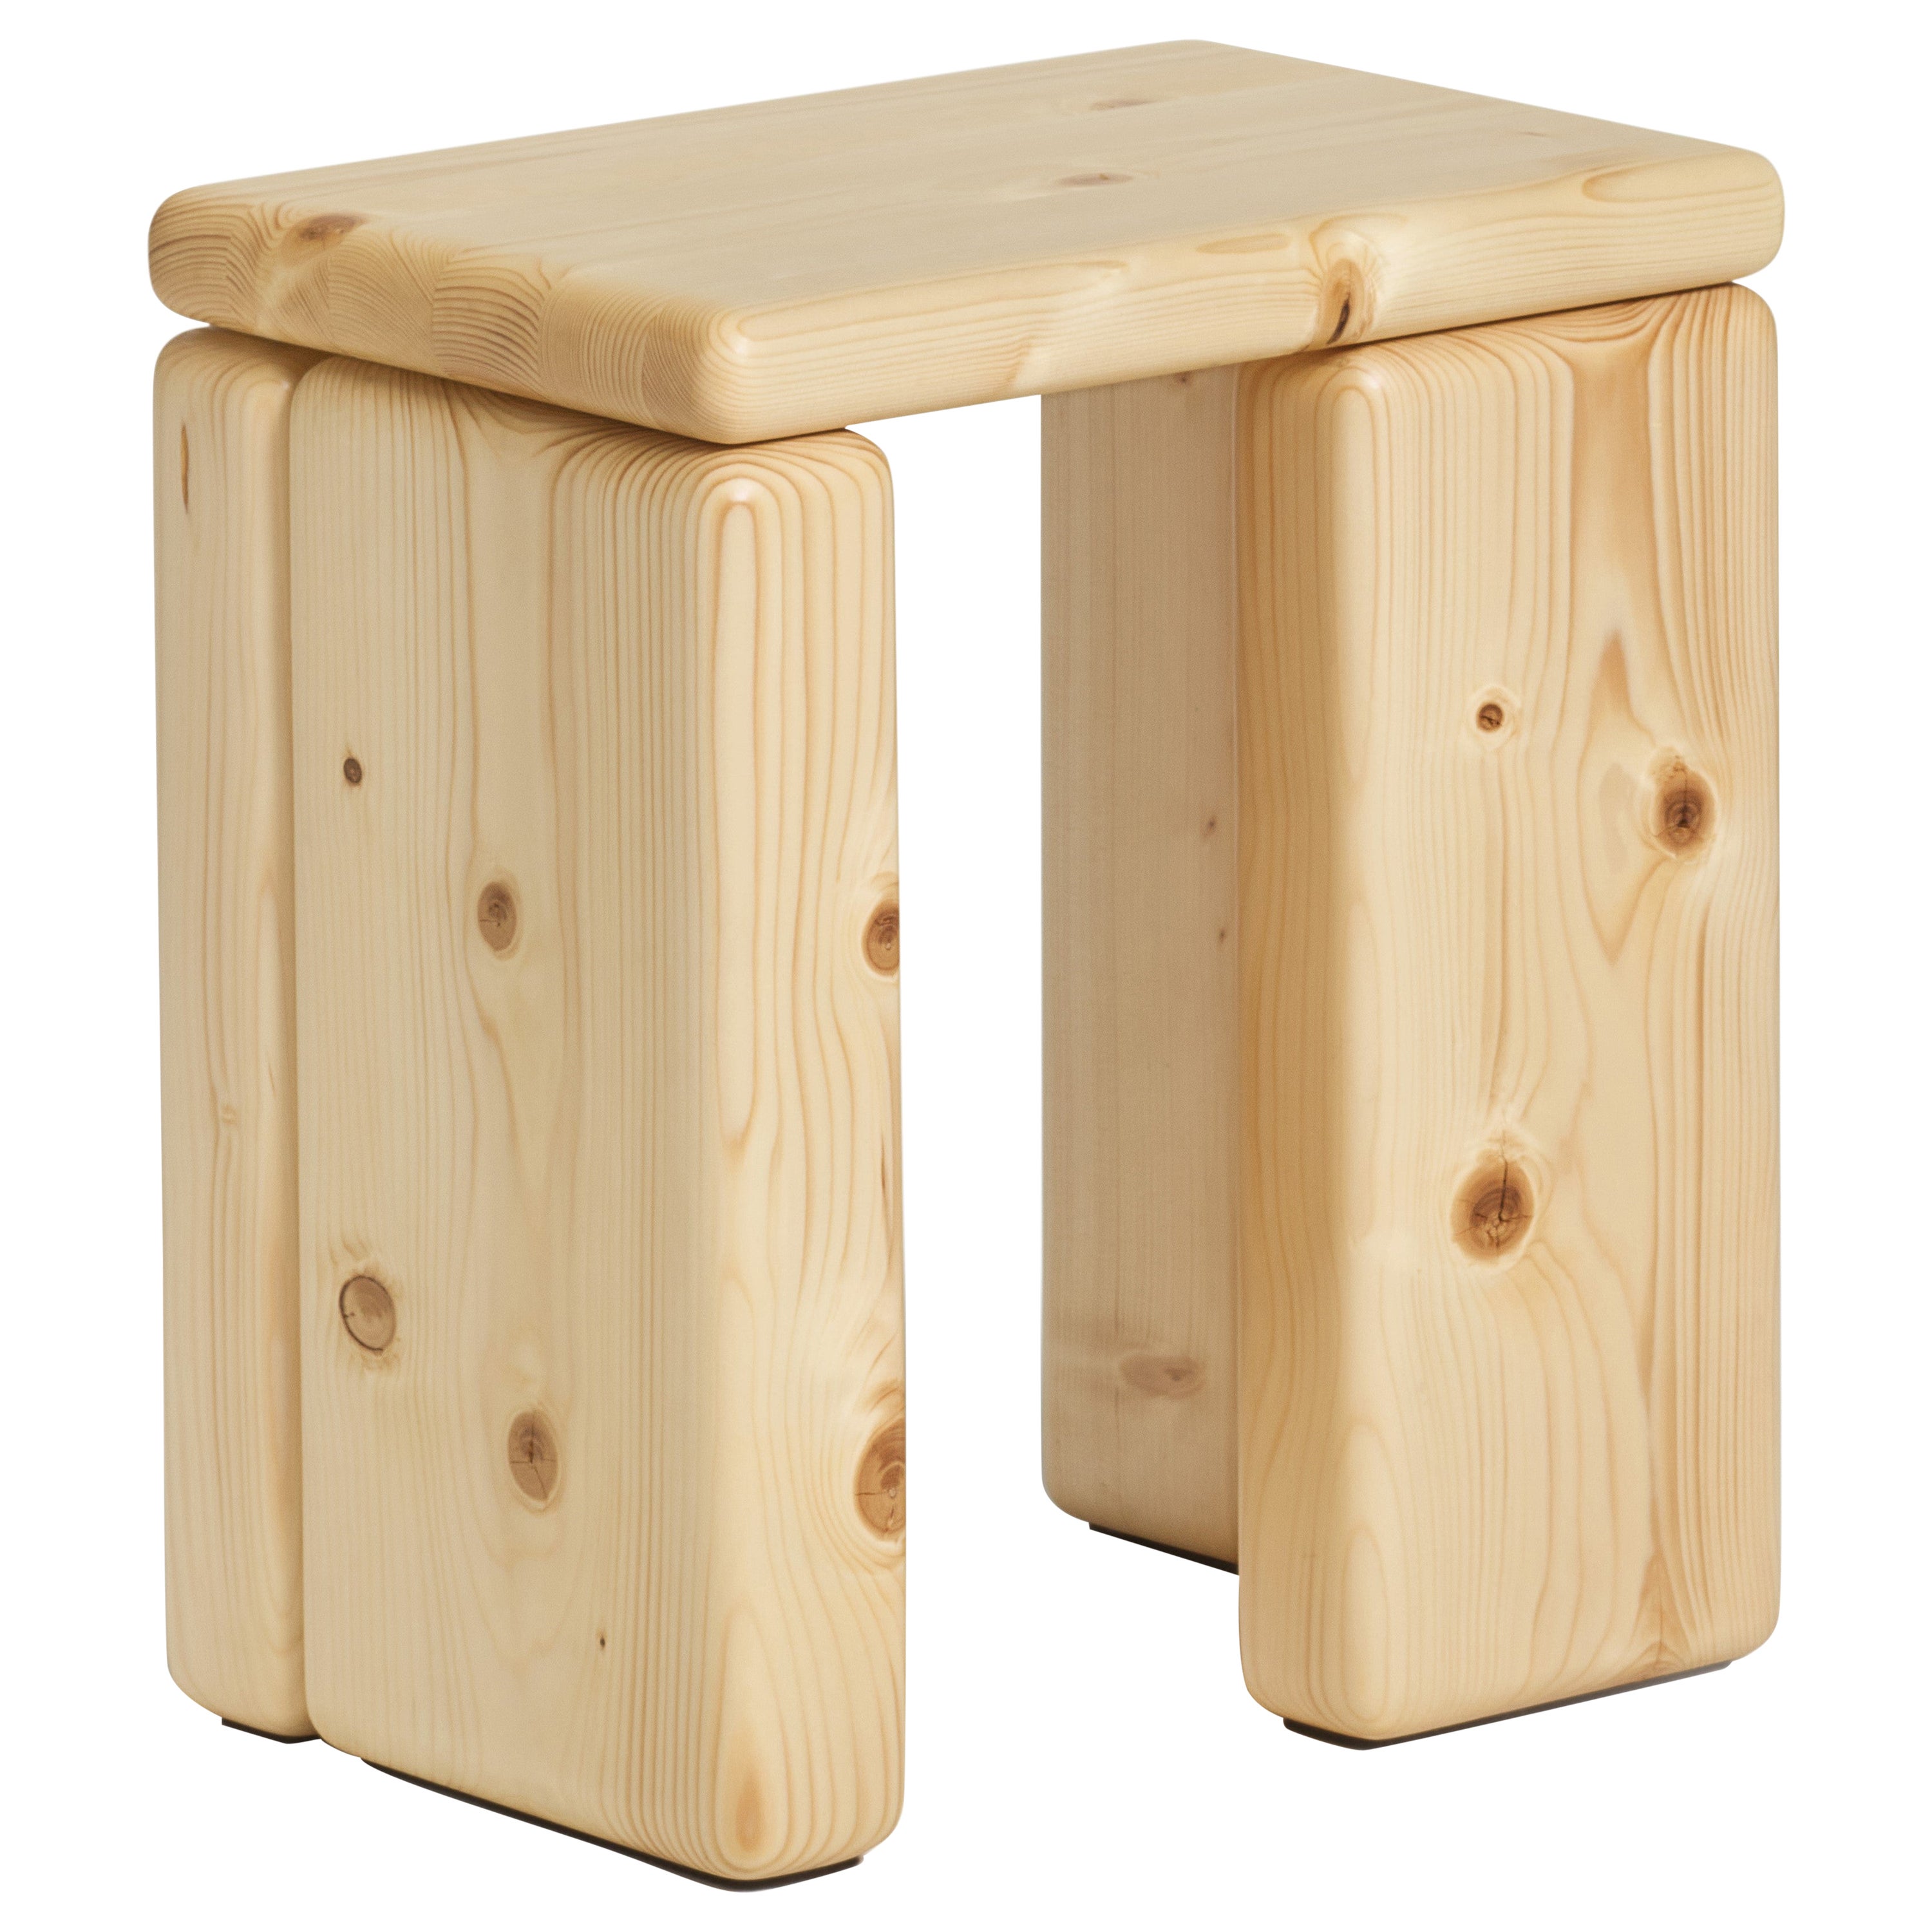 Timber Stool Uncolored Wood by Onno Adriaanse For Sale